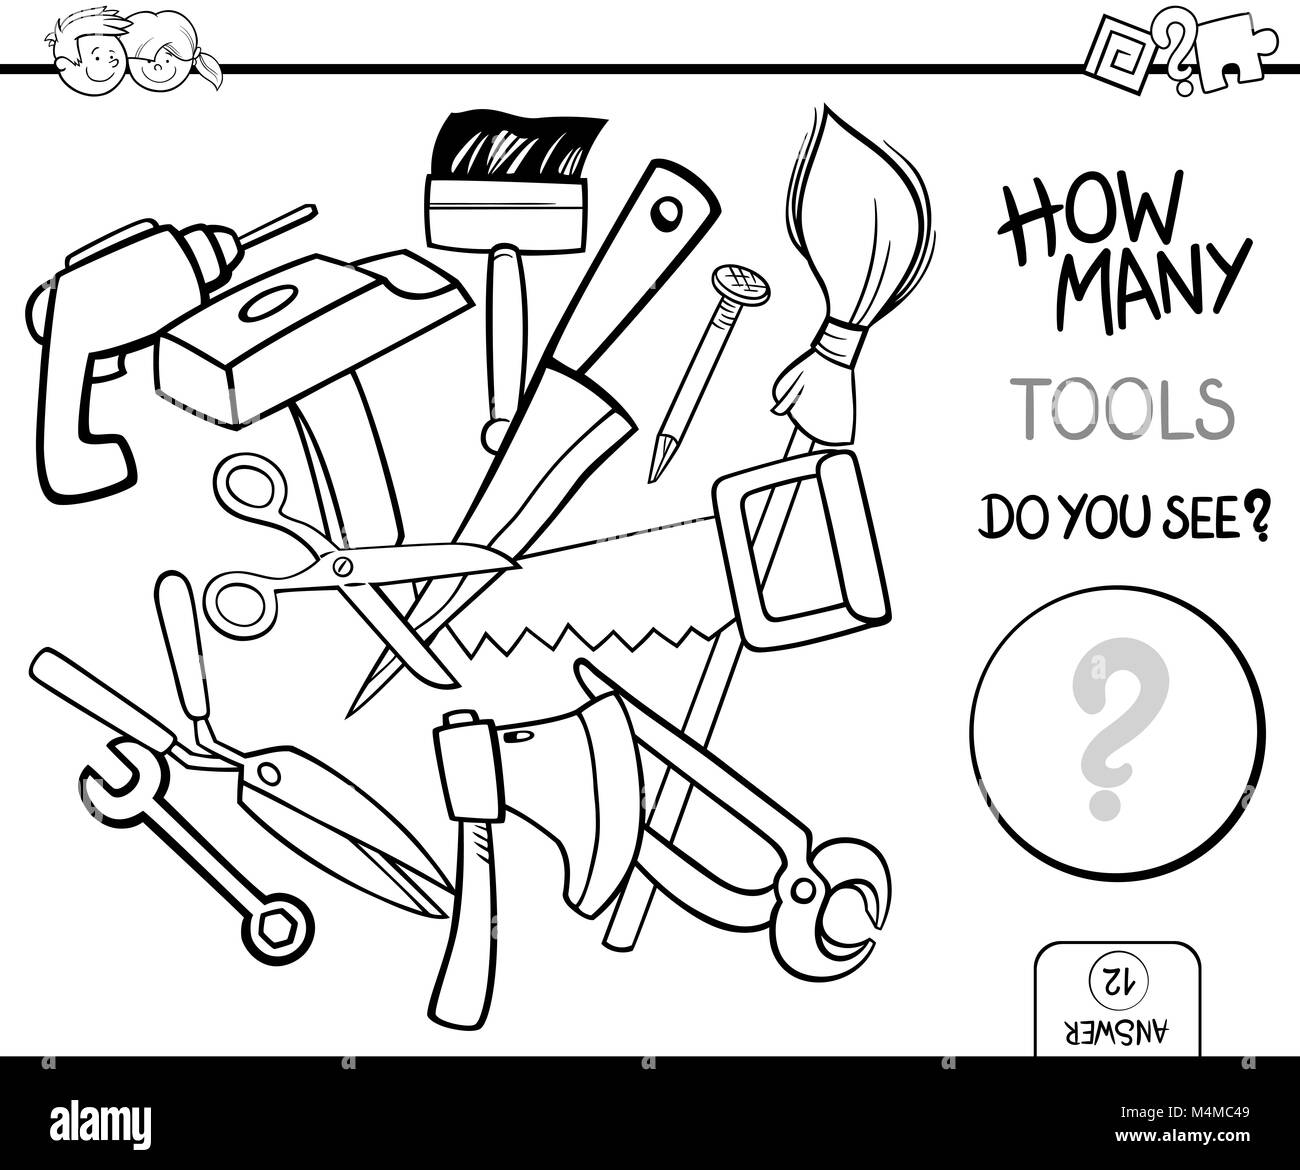 counting tools coloring page activity Stock Photo